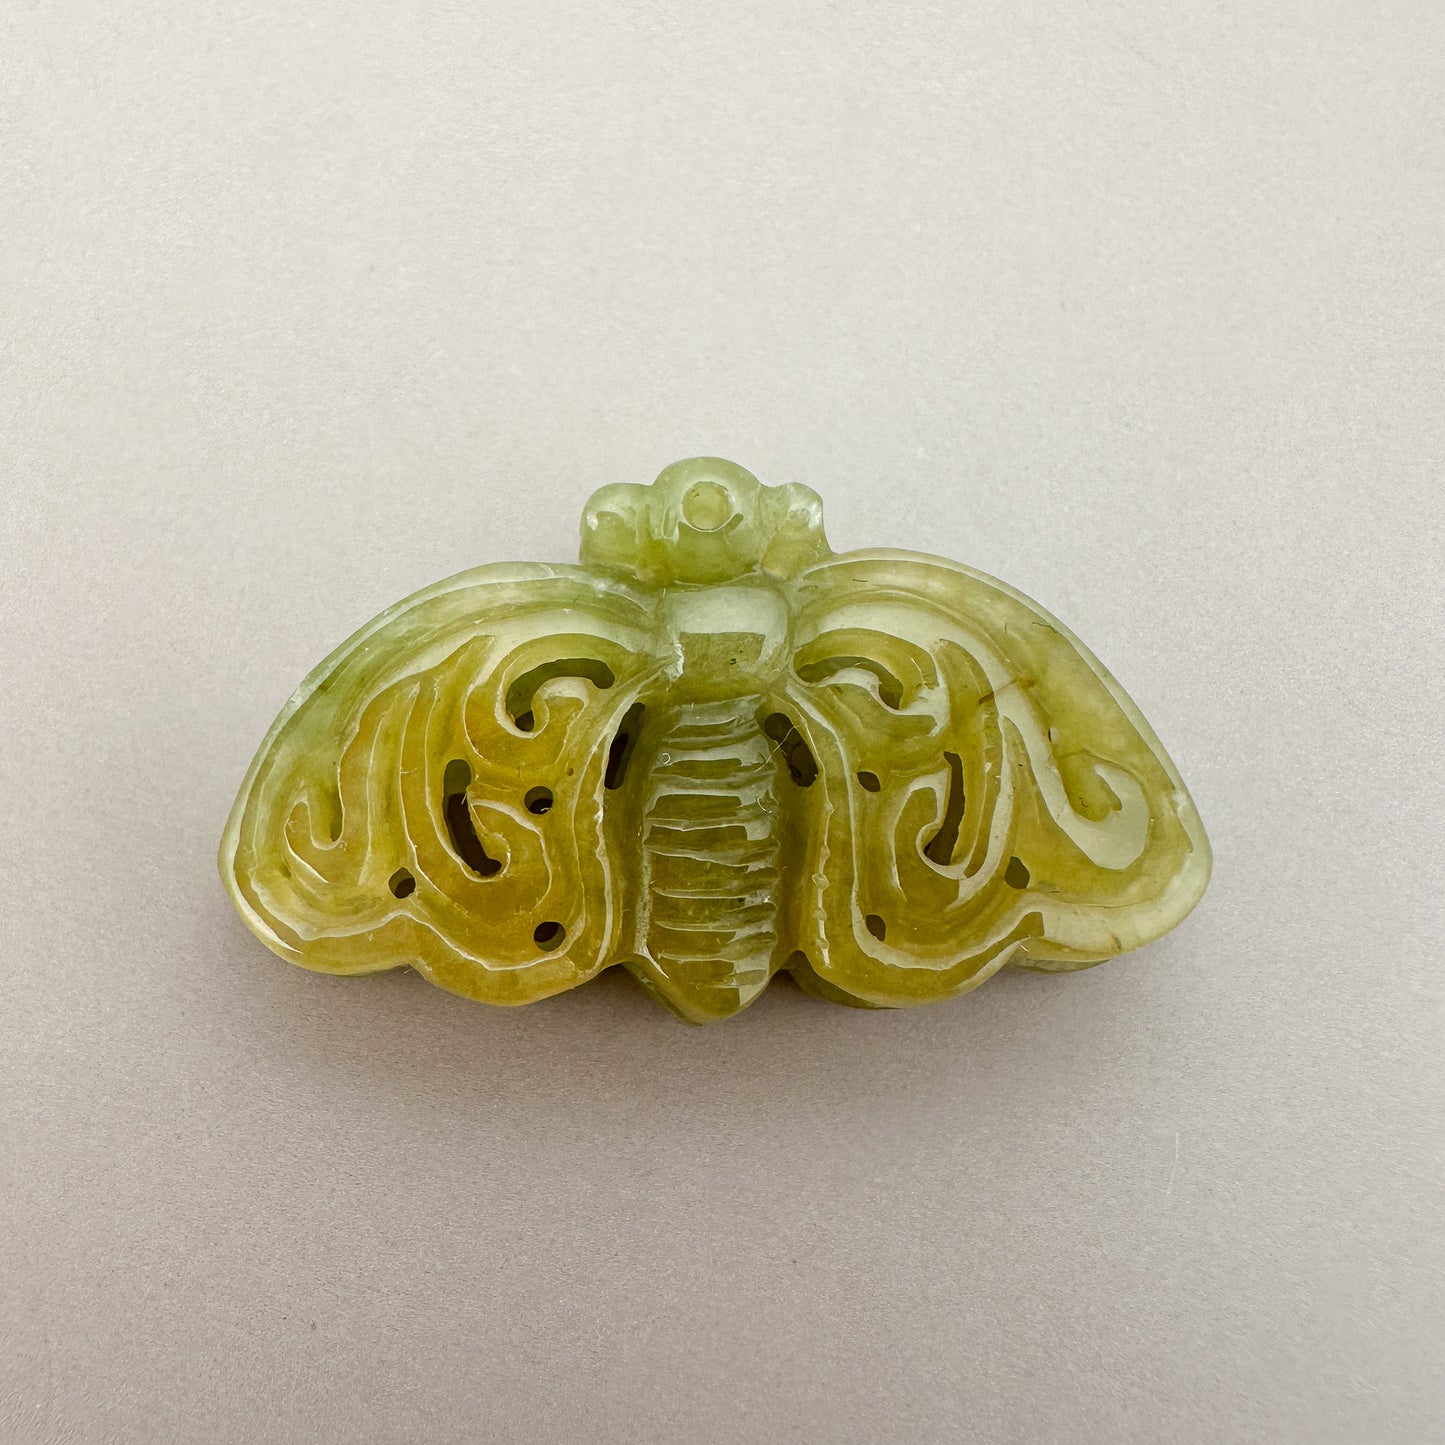 Green Jade Butterfly 28x17mm Carved Pendant - 1 pc. (P2940)